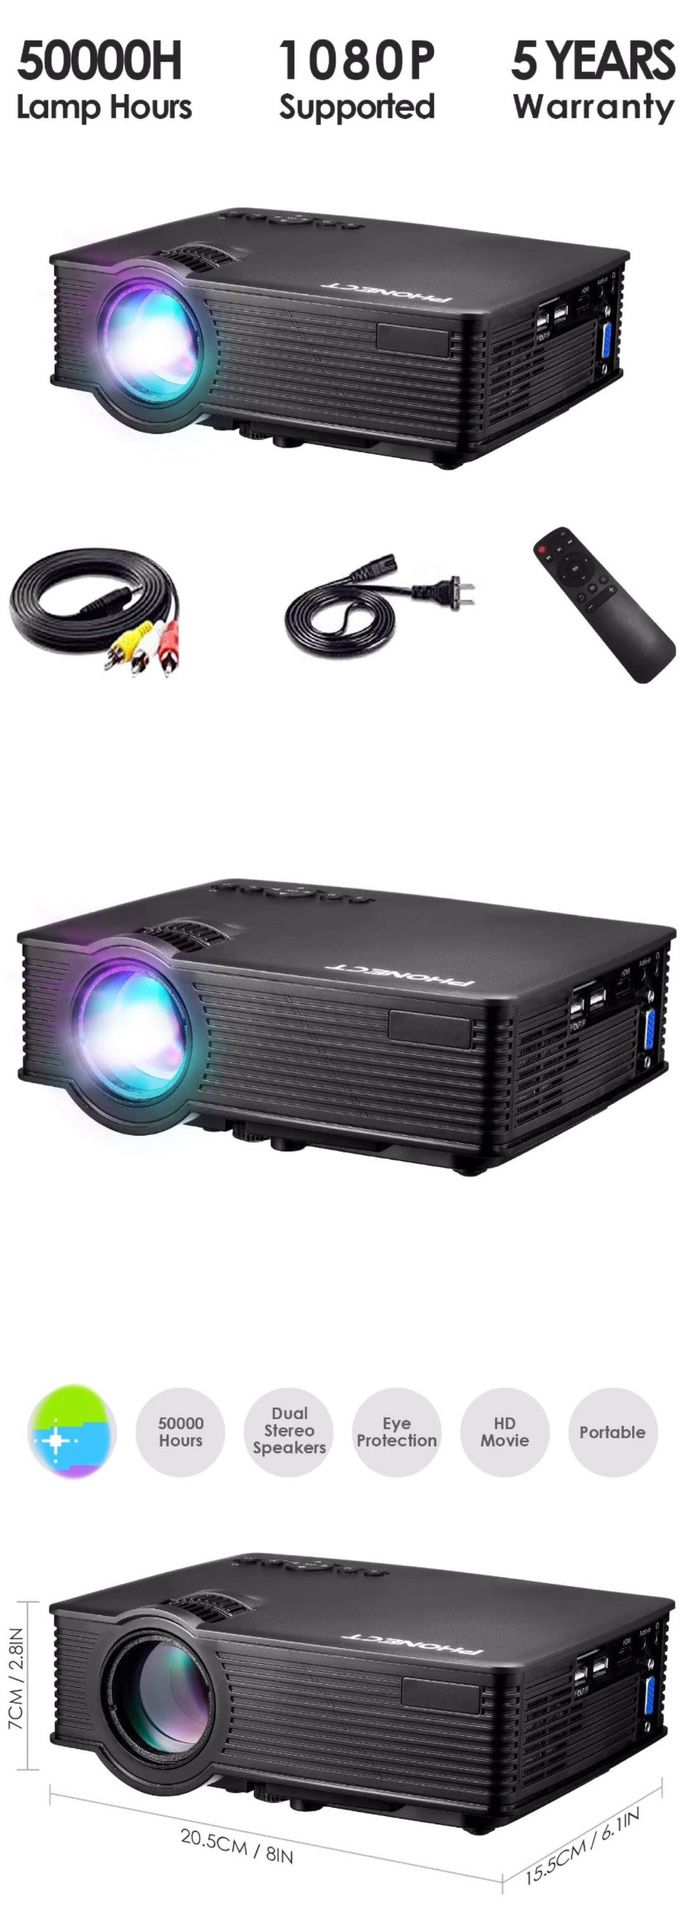 Mini Projector, LUX Video Projector, Full HD 1080P and Up to 180" Display, Portable Projector Movie with 50,000 Hrs LED Lamp Life, Work with Fire TV